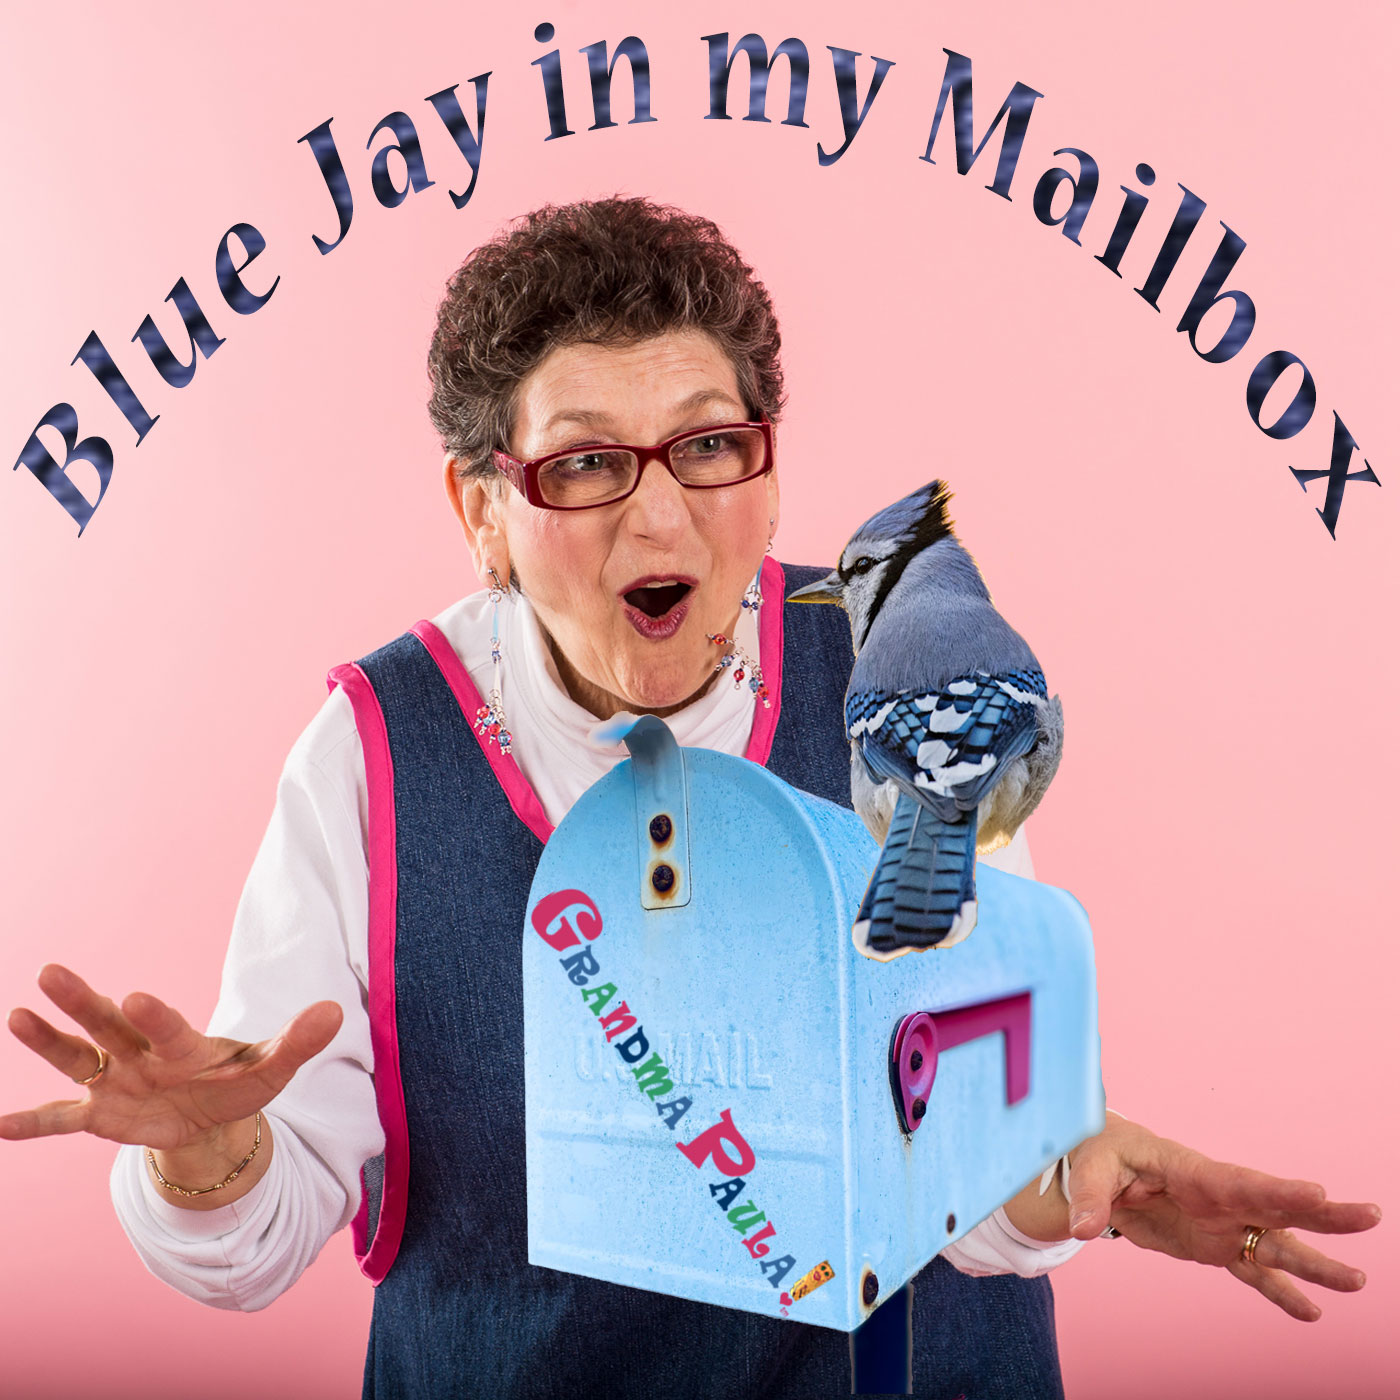 BLUEJAY MAILBOX COVER fontupdate